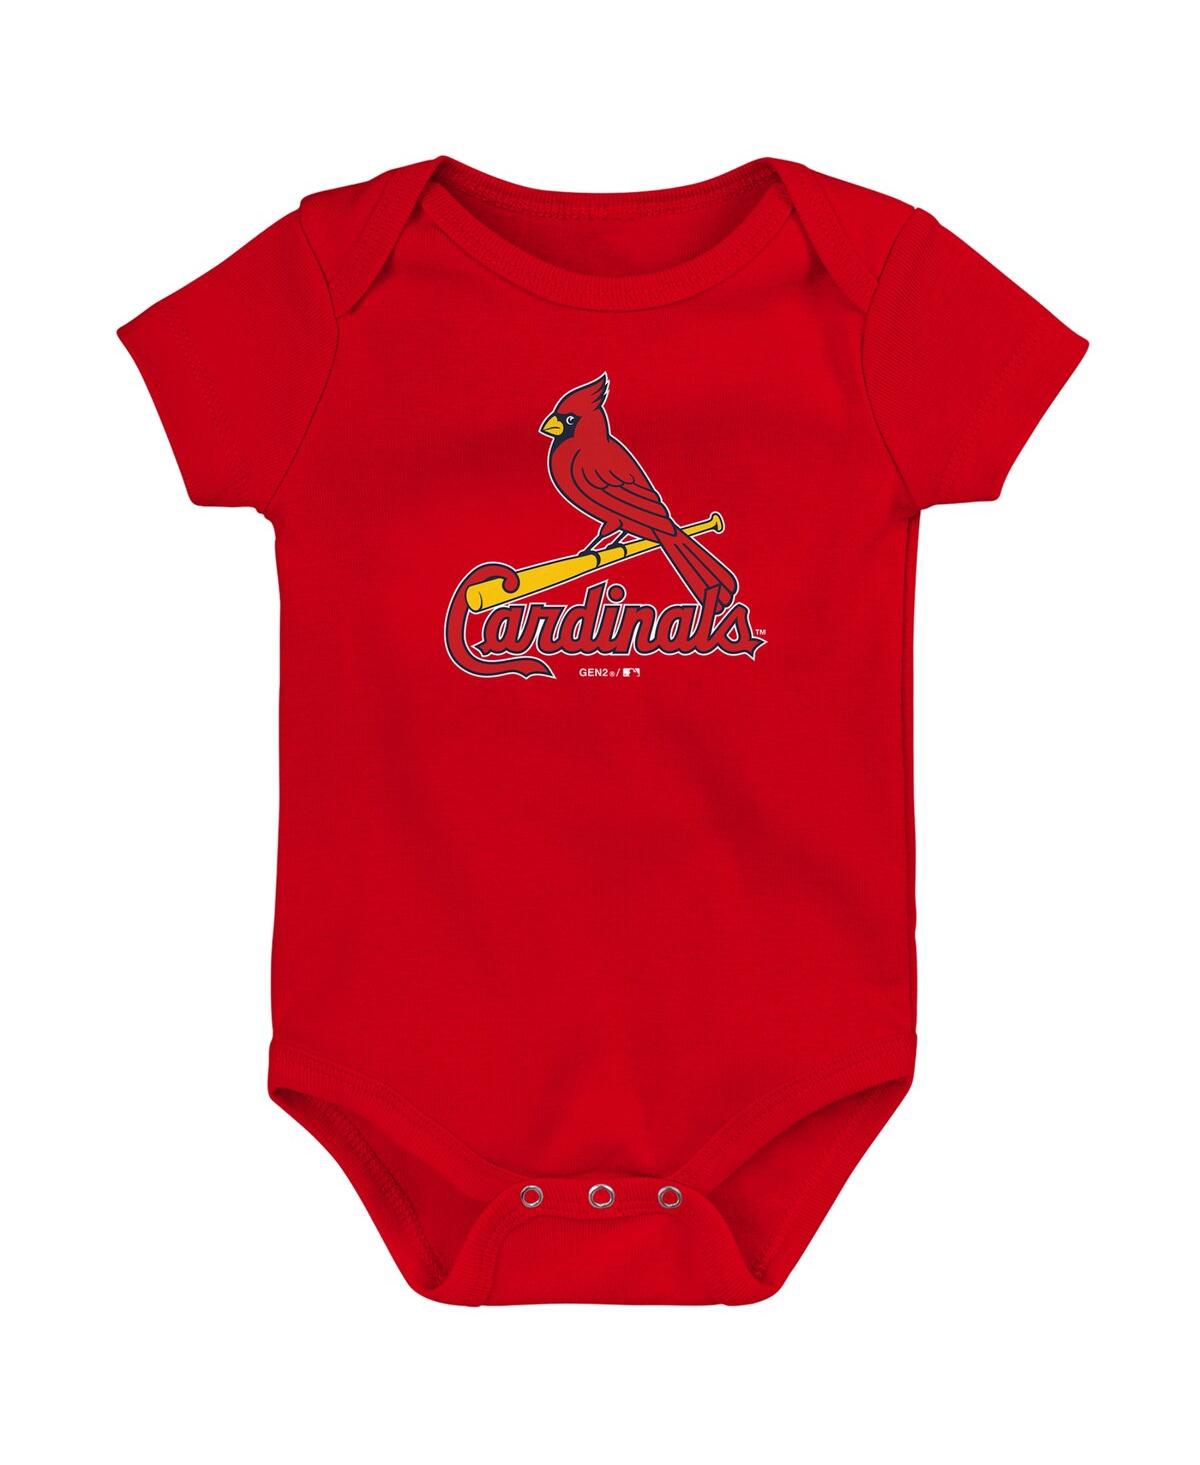 Outerstuff Babies' Newborn And Infant Boys And Girls Red St. Louis Cardinals Primary Team Logo Bodysuit